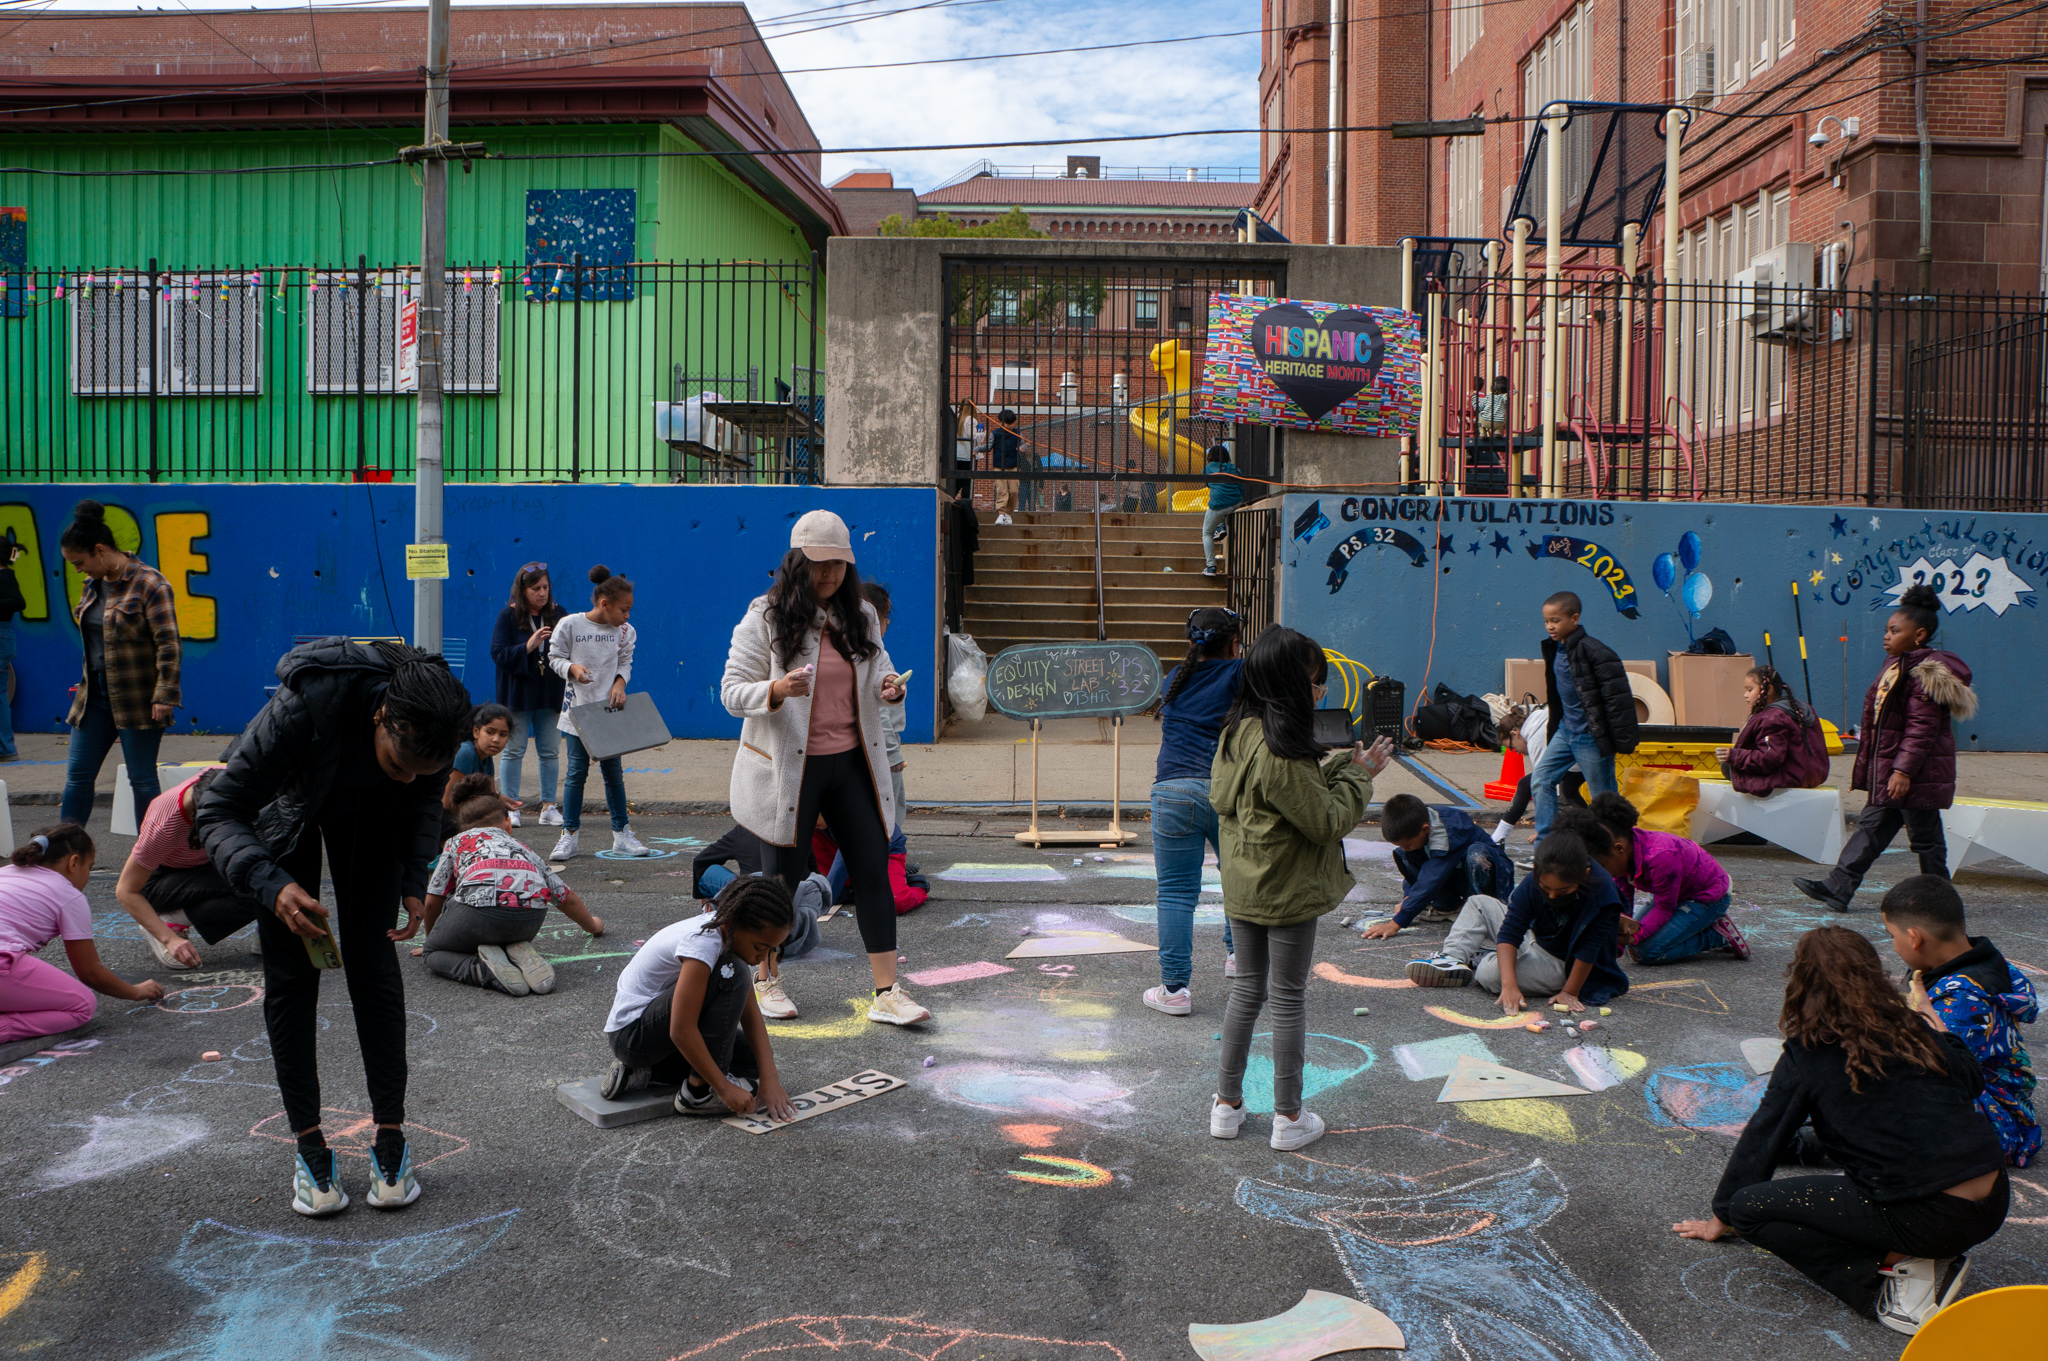 A view of an Open Street with elementary school students and teachers chalking on the ground.